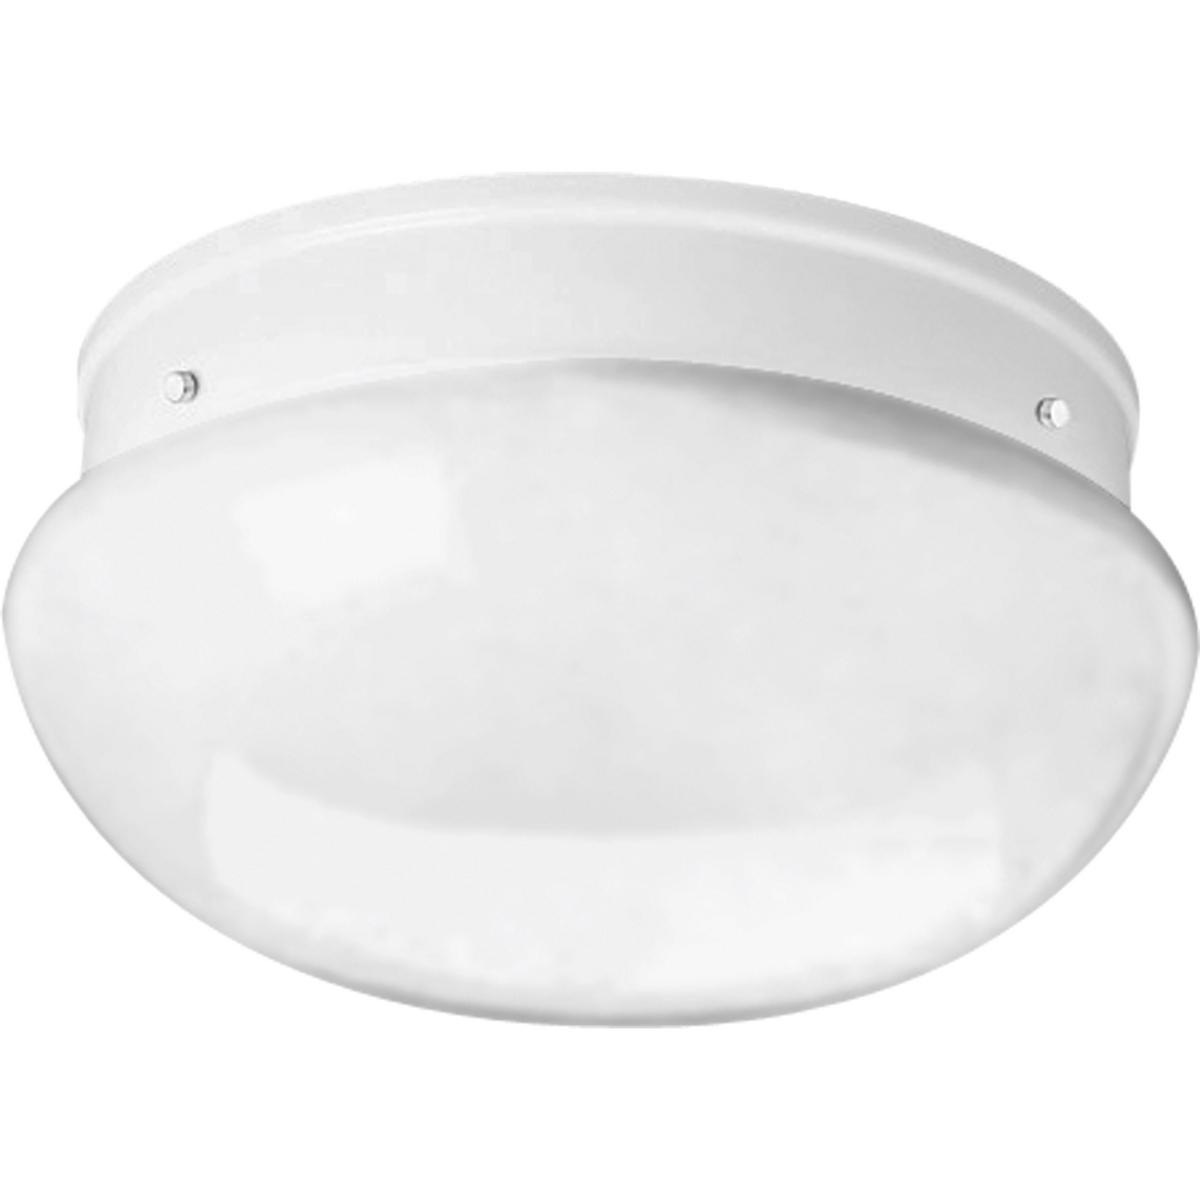 Hubbell P3412-30 With a monochrome construction perfect for a contemporary home, this two-light fixture charms with its mushroom-shaped white glass shade. The look is clean and unobtrusive, playing on the freshness of crisp white. A traditional two-light close to ceiling 